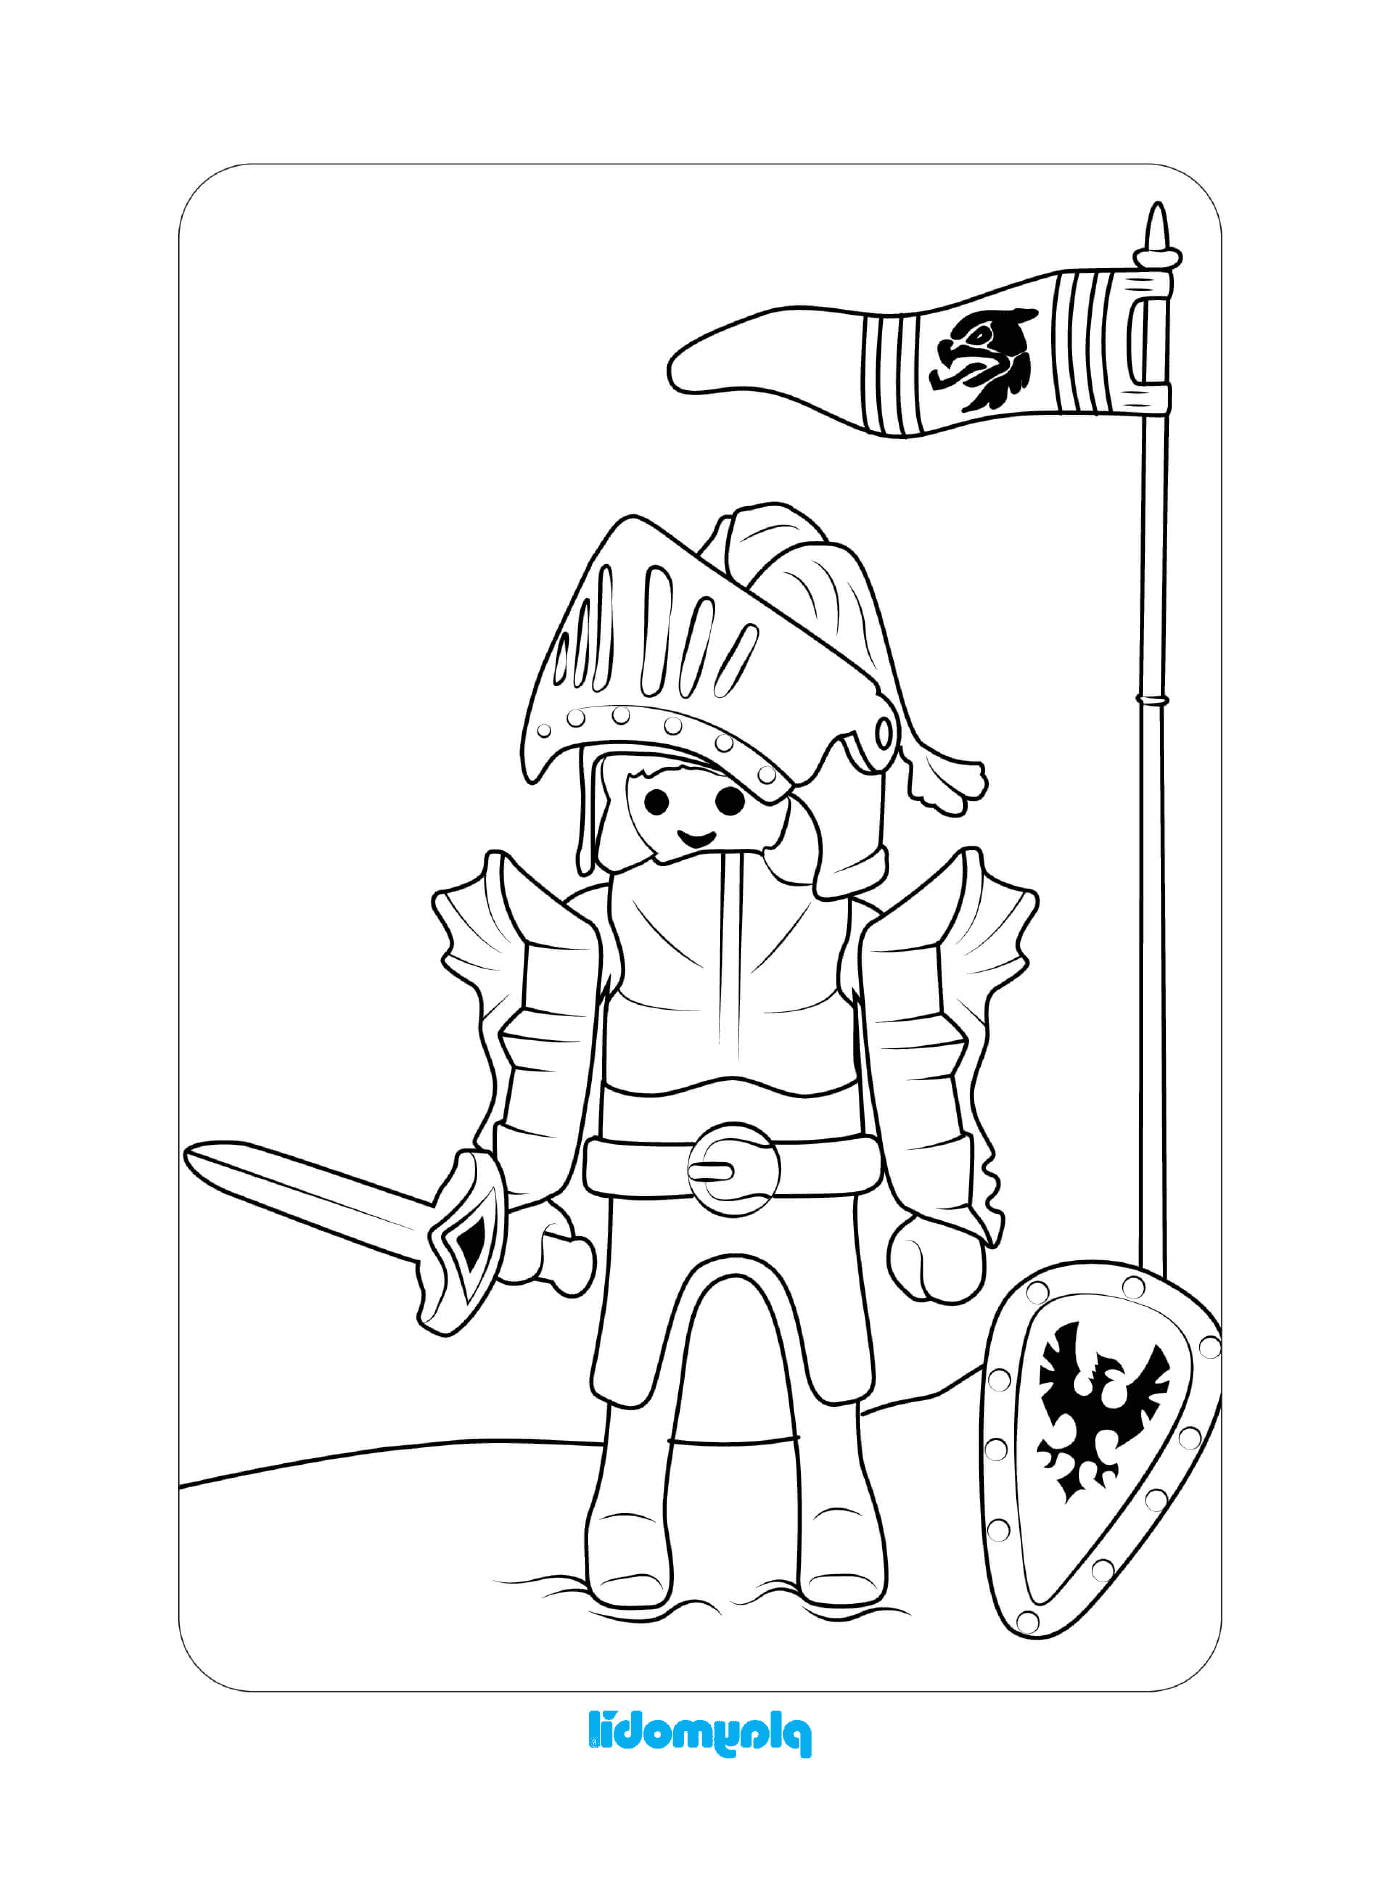  Knight in toy 